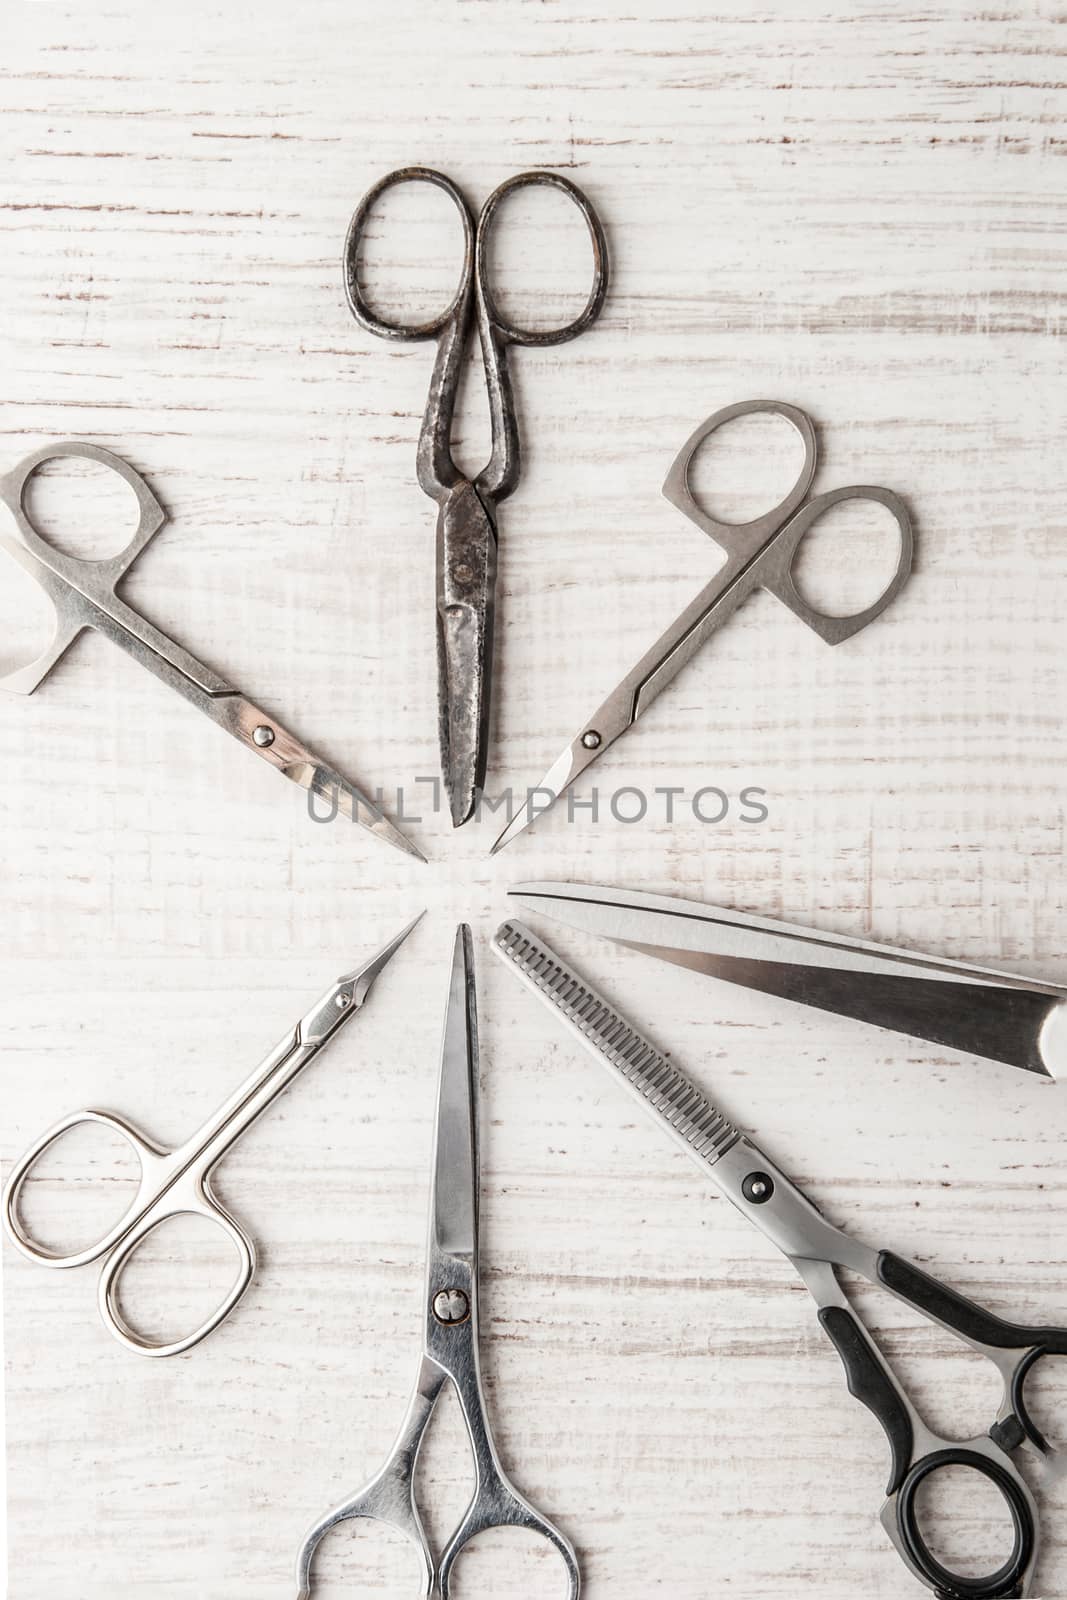 Set of scisSet of scissors on a wooden table horizontalsors 